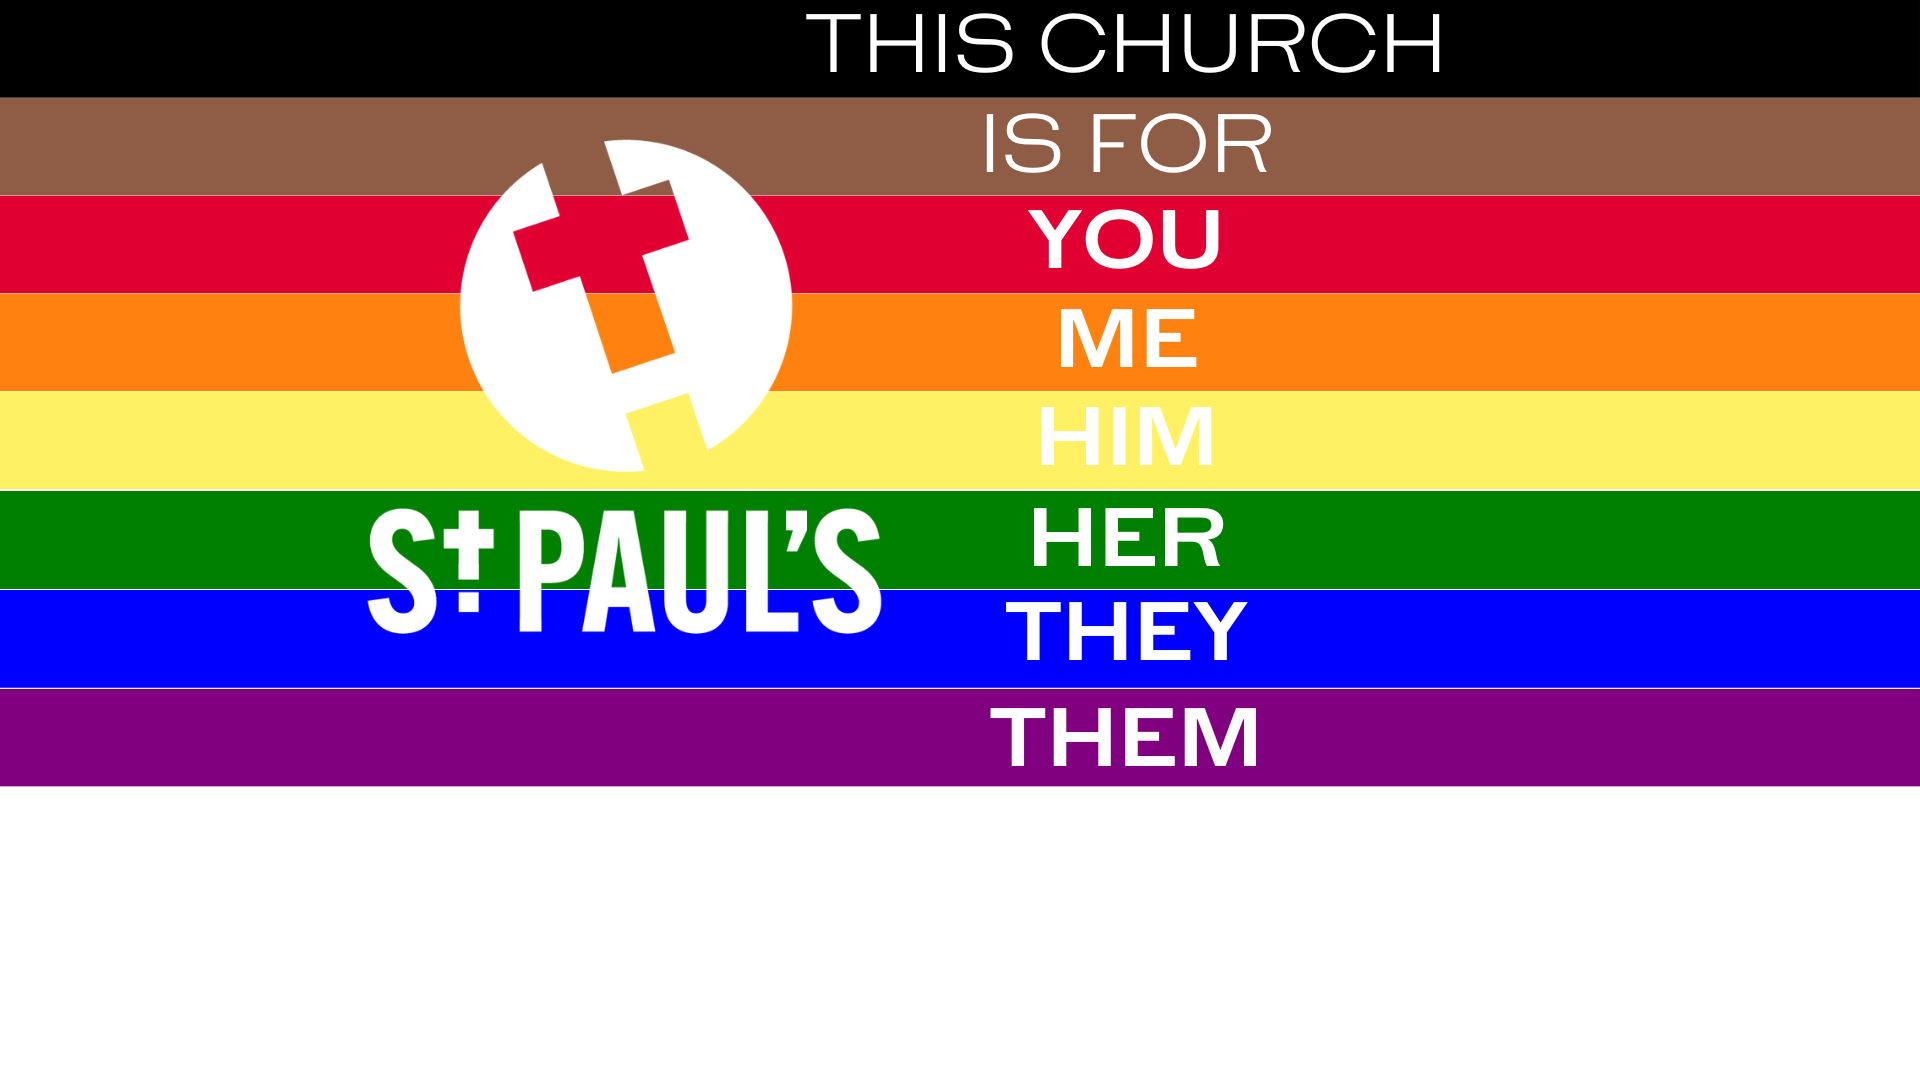 This church is for you, me, him, her, they, and them. All are welcome at St. Paul's United Methodist Church.